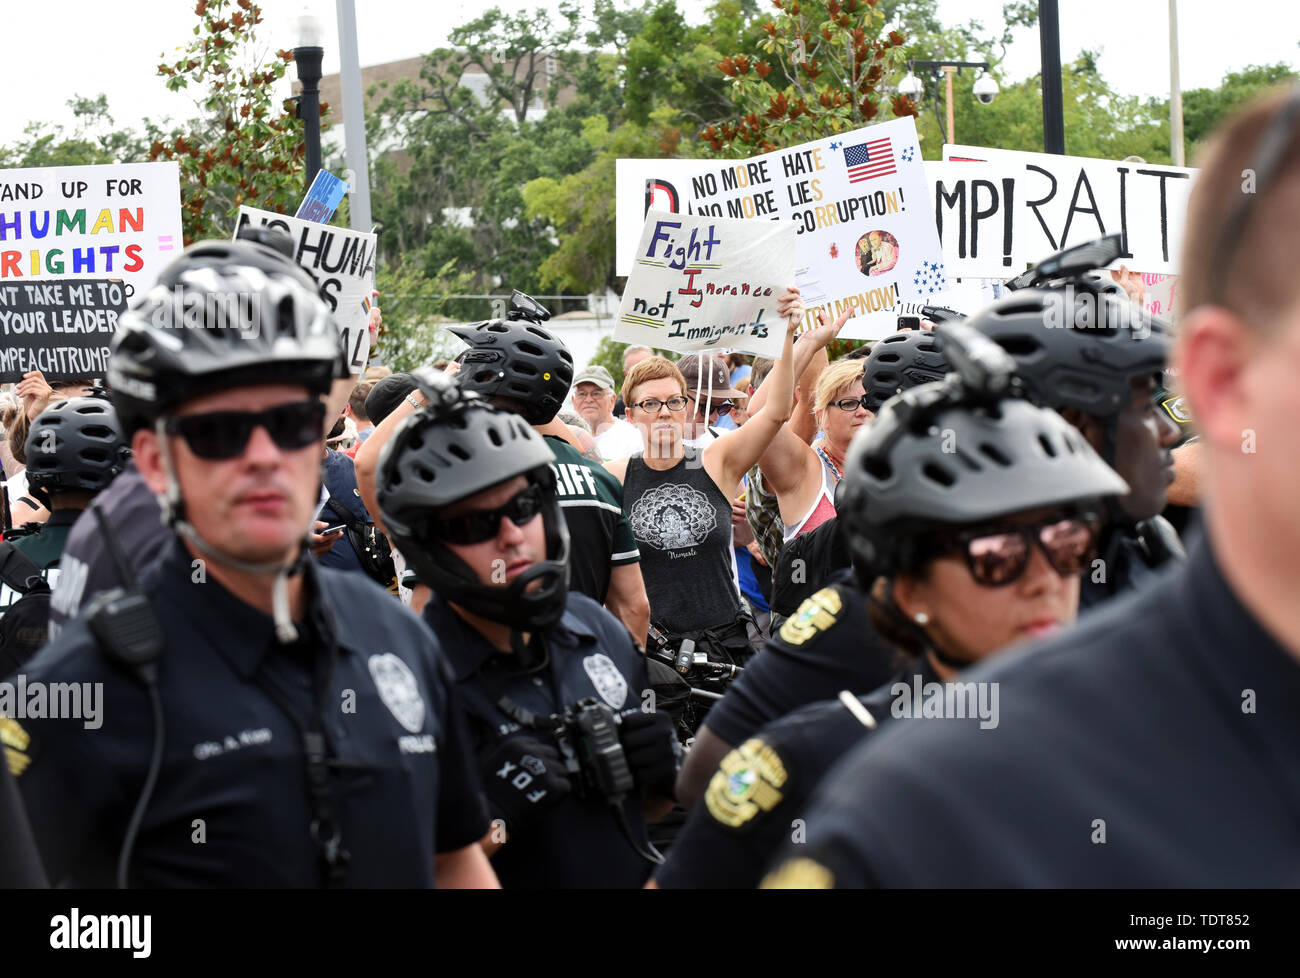 Orlando, Florida, USA. 18th June, 2019. Police separate Trump supporters and Trump protesters near the site of a Make America Great Again rally at the Amway Center on June 18, 2019 in Orlando, Florida. The rally is billed as Trump's kick-off event for his campaign for re-election in 2020. Credit: Paul Hennessy/Alamy Live News Stock Photo